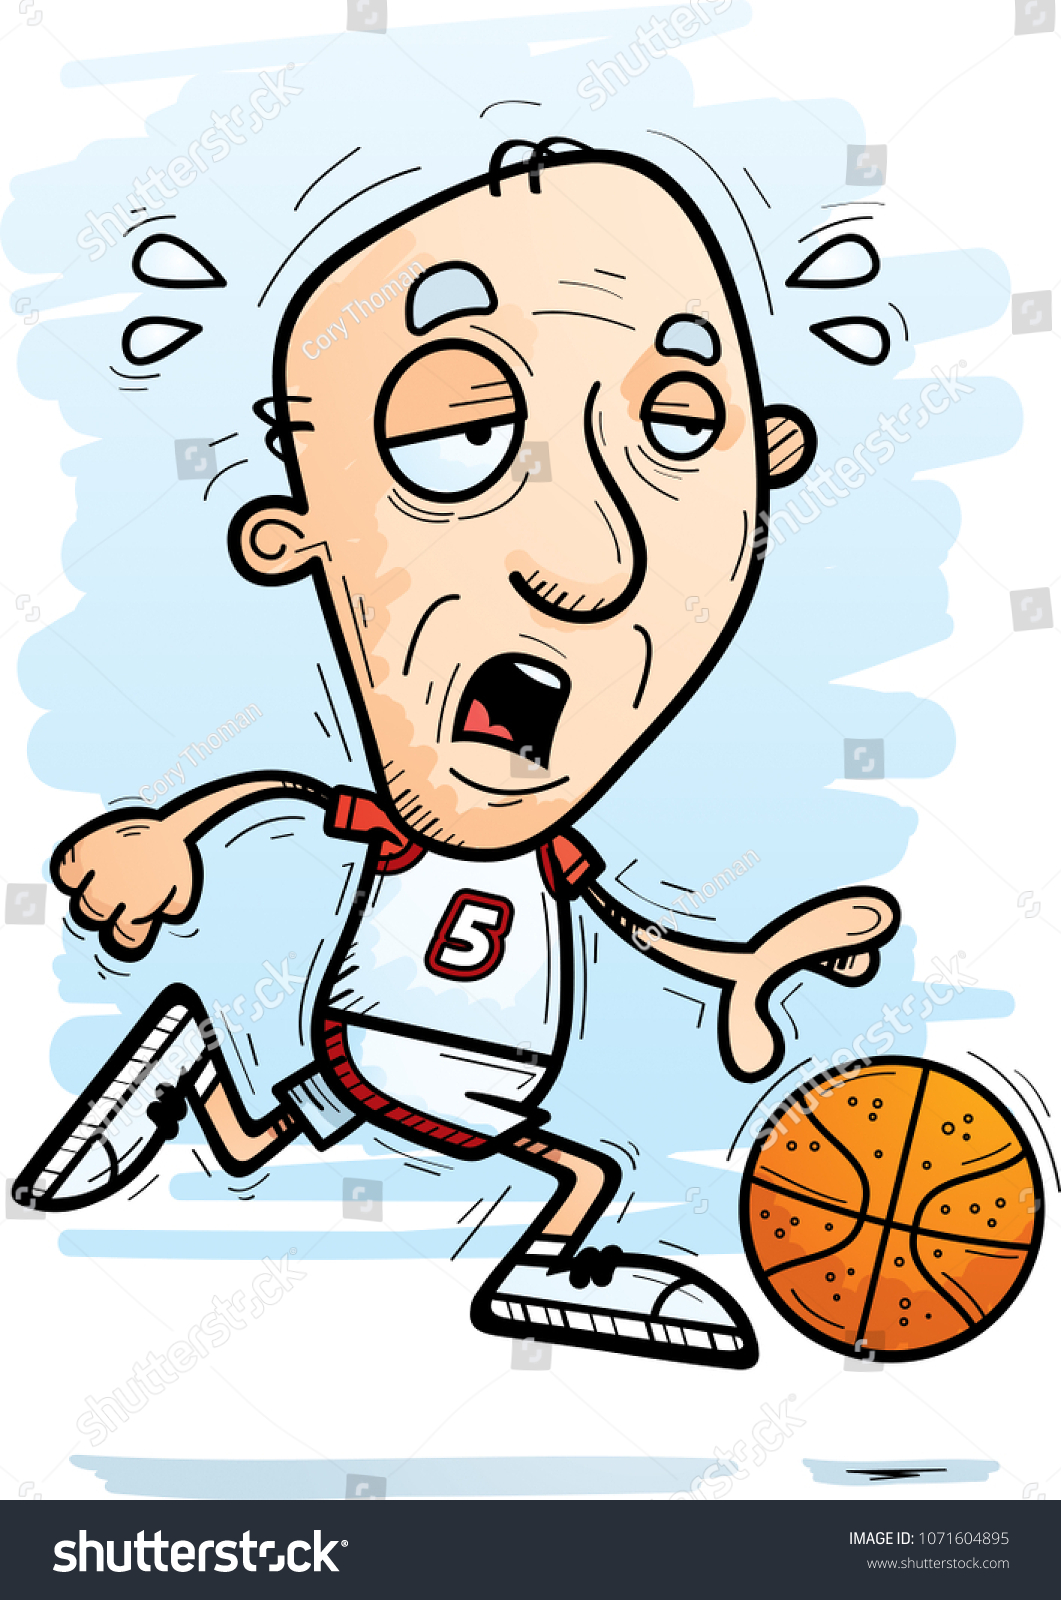 A cartoon illustration of a senior citizen man basketball player running and looking exhausted. #1071604895